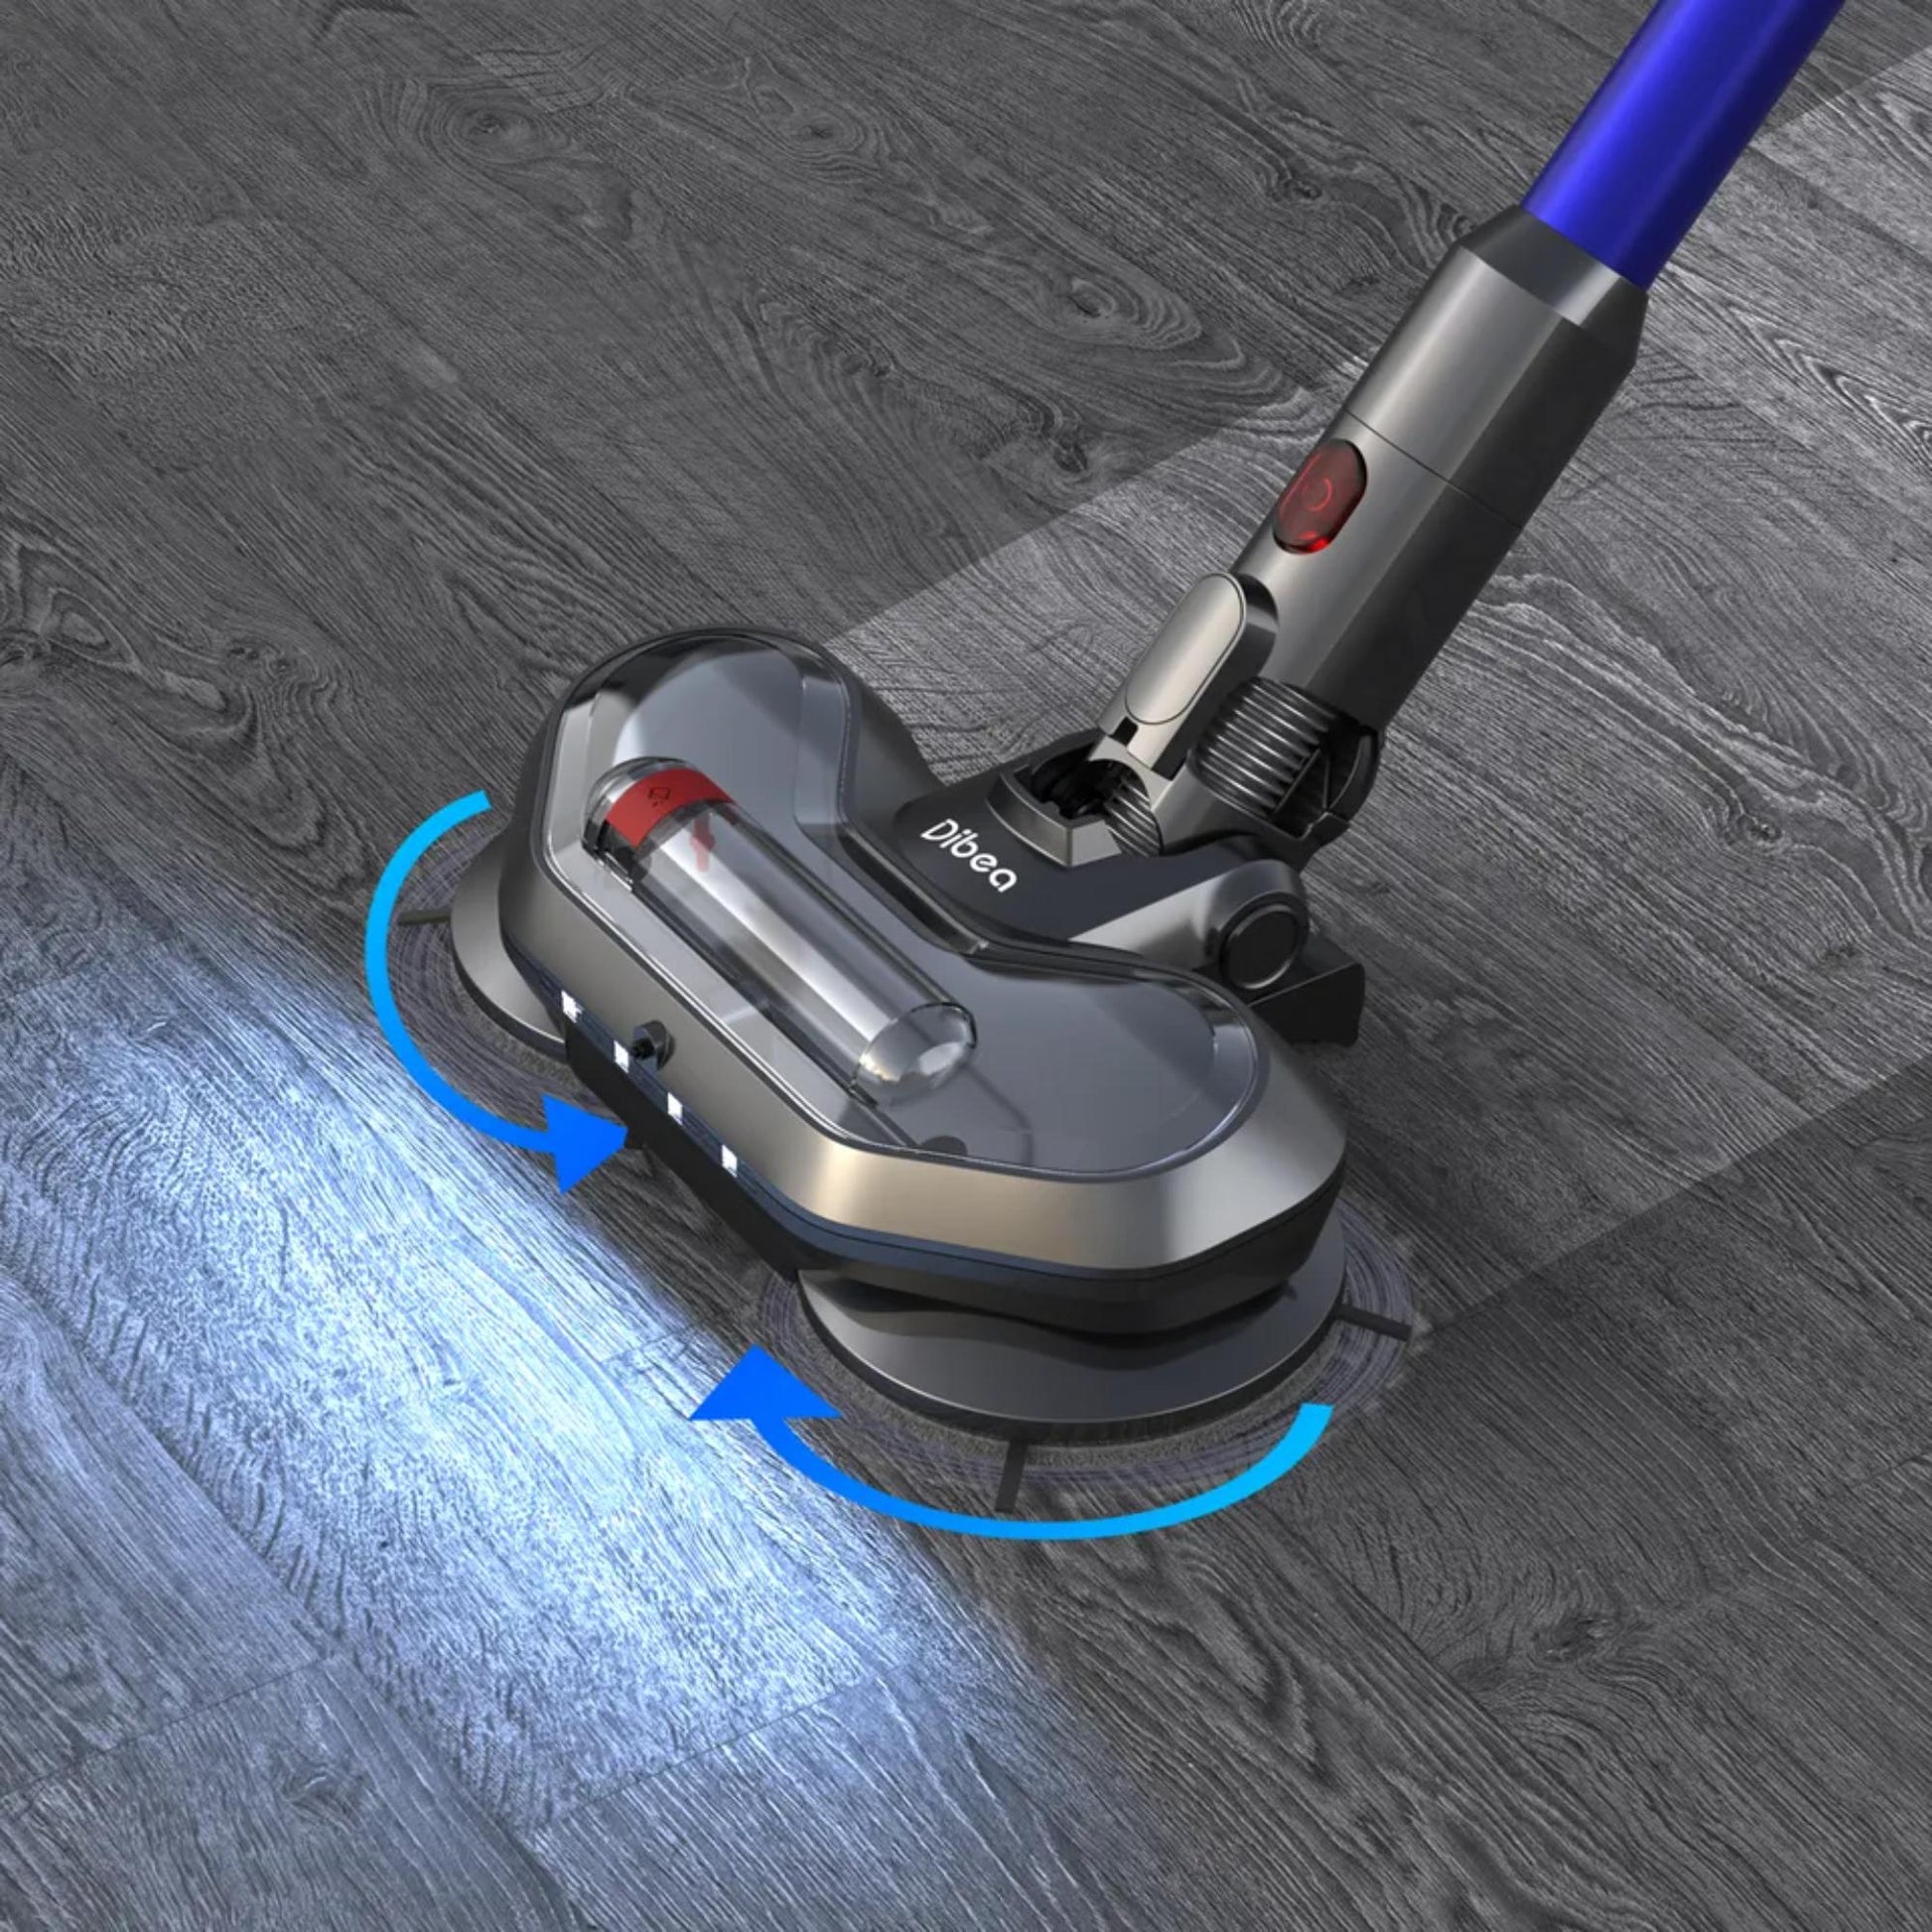 Dibea F20 Smart stick vacuum technology, enhancing cleaning efficiency with intuitive features. | Blue Chilli Electronics.